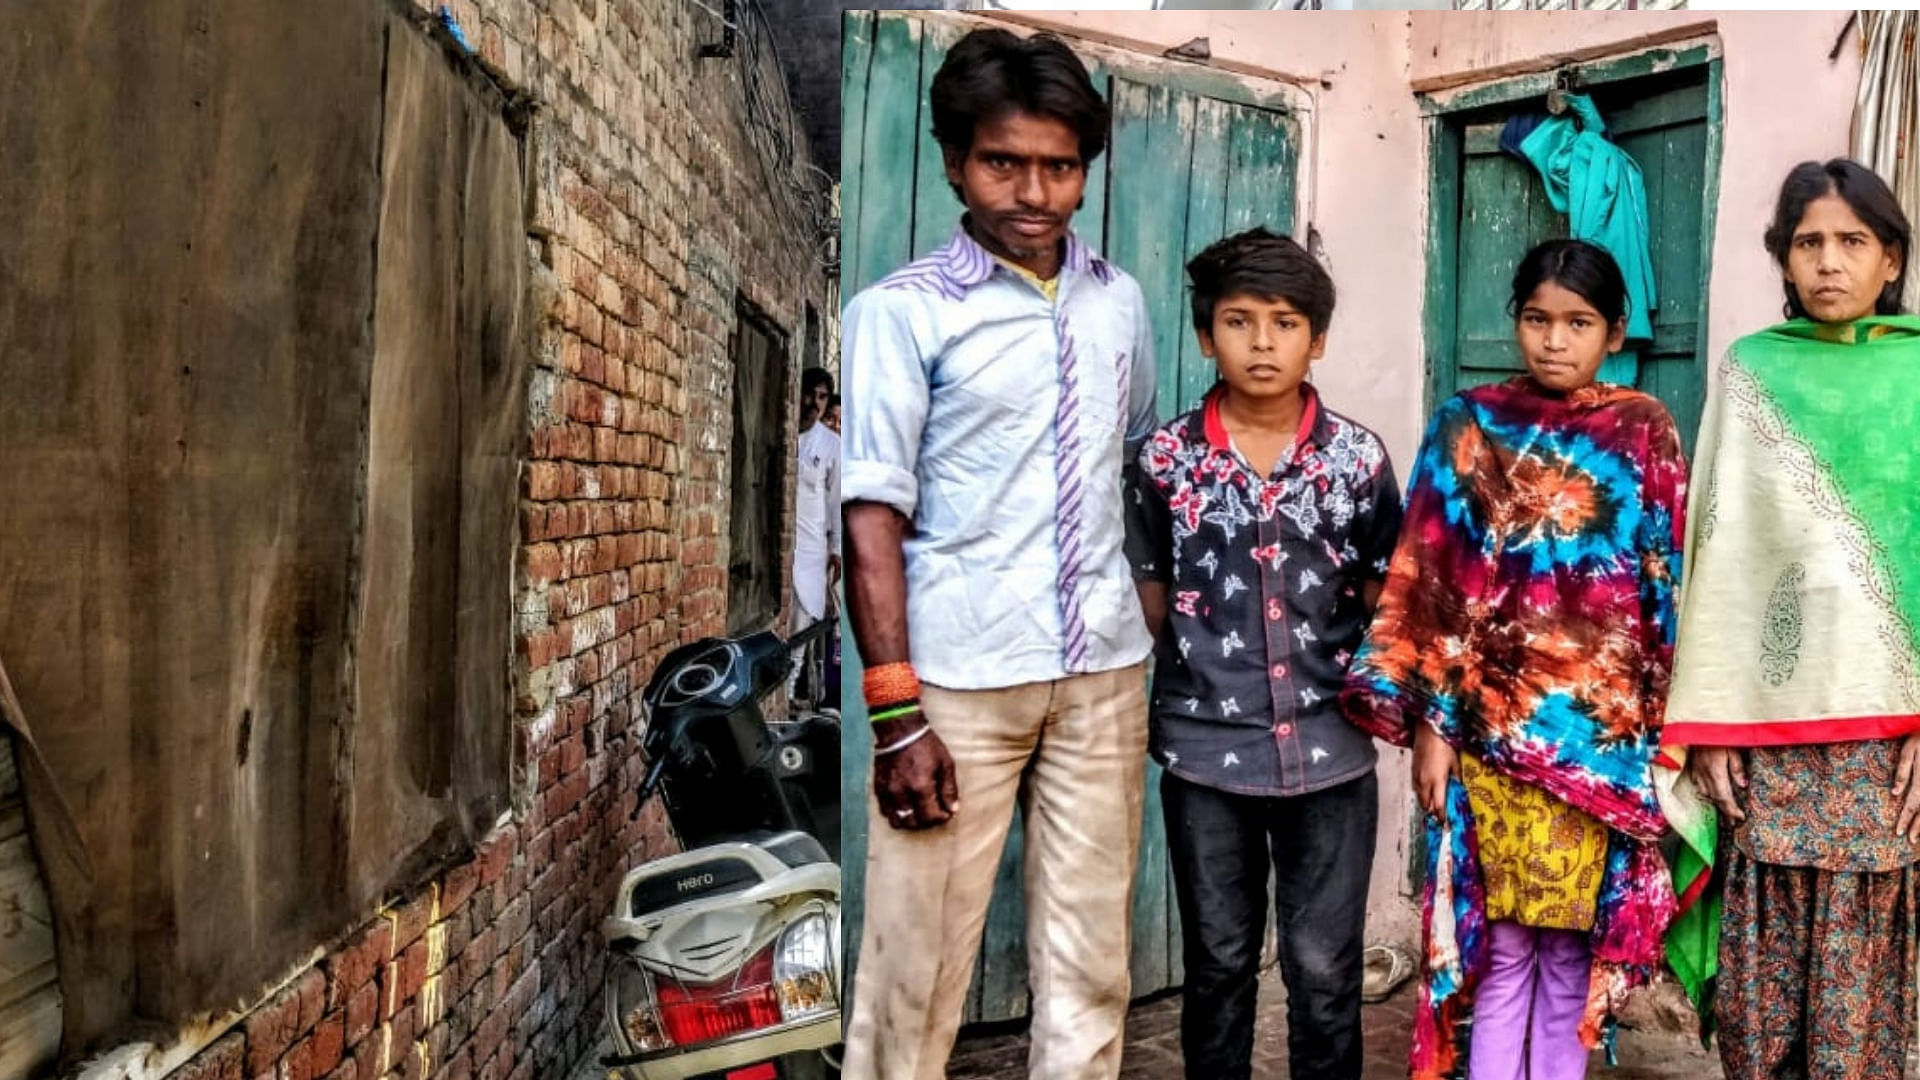 Paswan and Lalita’s family came to Joda Phatak to change their fortunes, but find themselves battling another crisis.